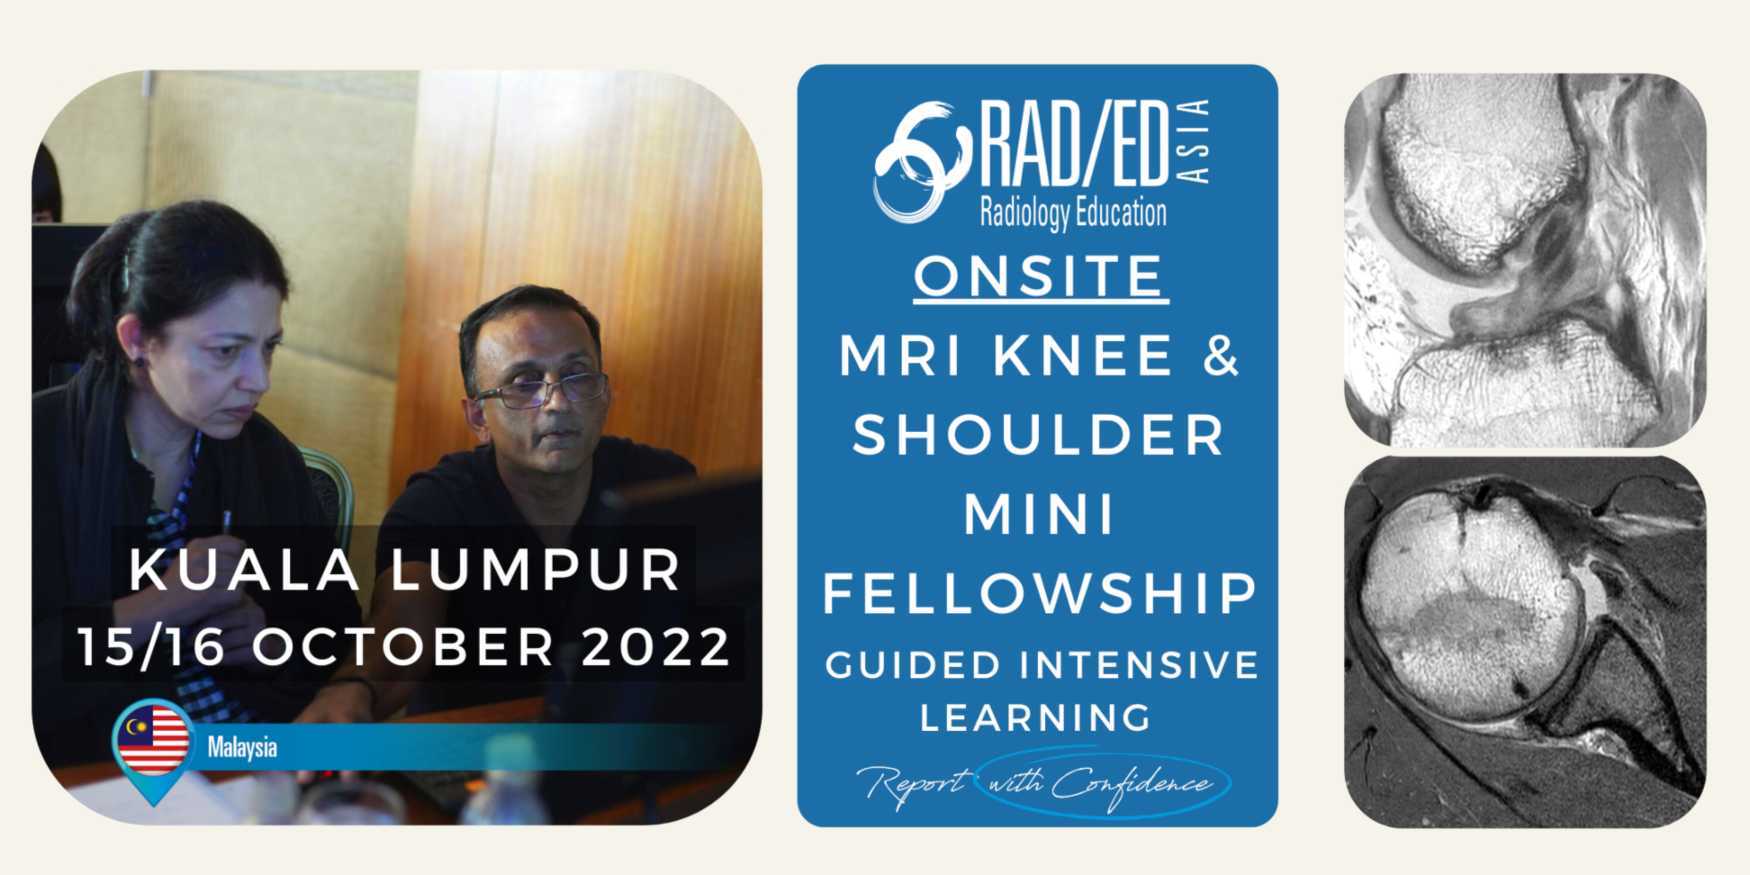 msk radiology conference course musculoskeletal mri knee shoulder malaysia kuala lumpur